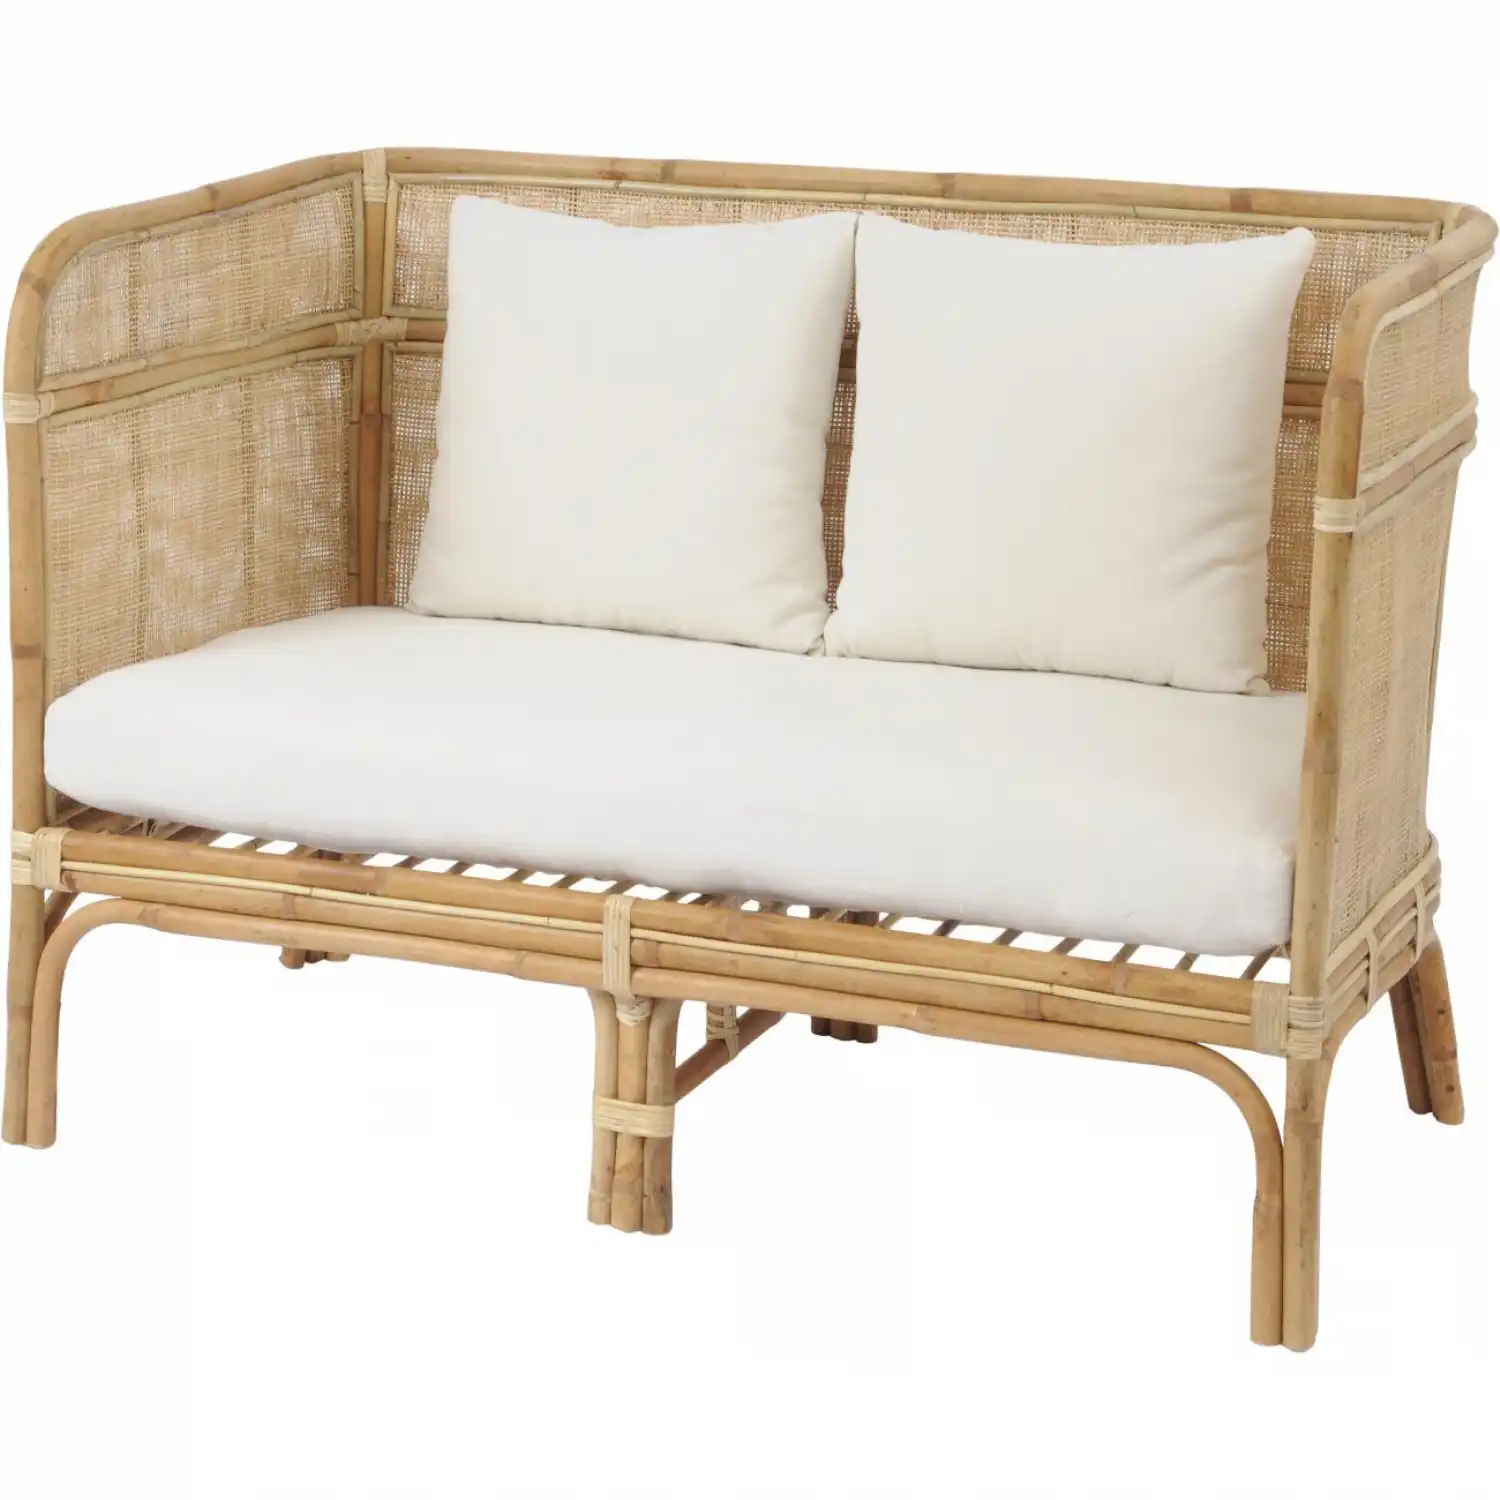 Rattan Bench High Wrap Round Back and Seat Cushions